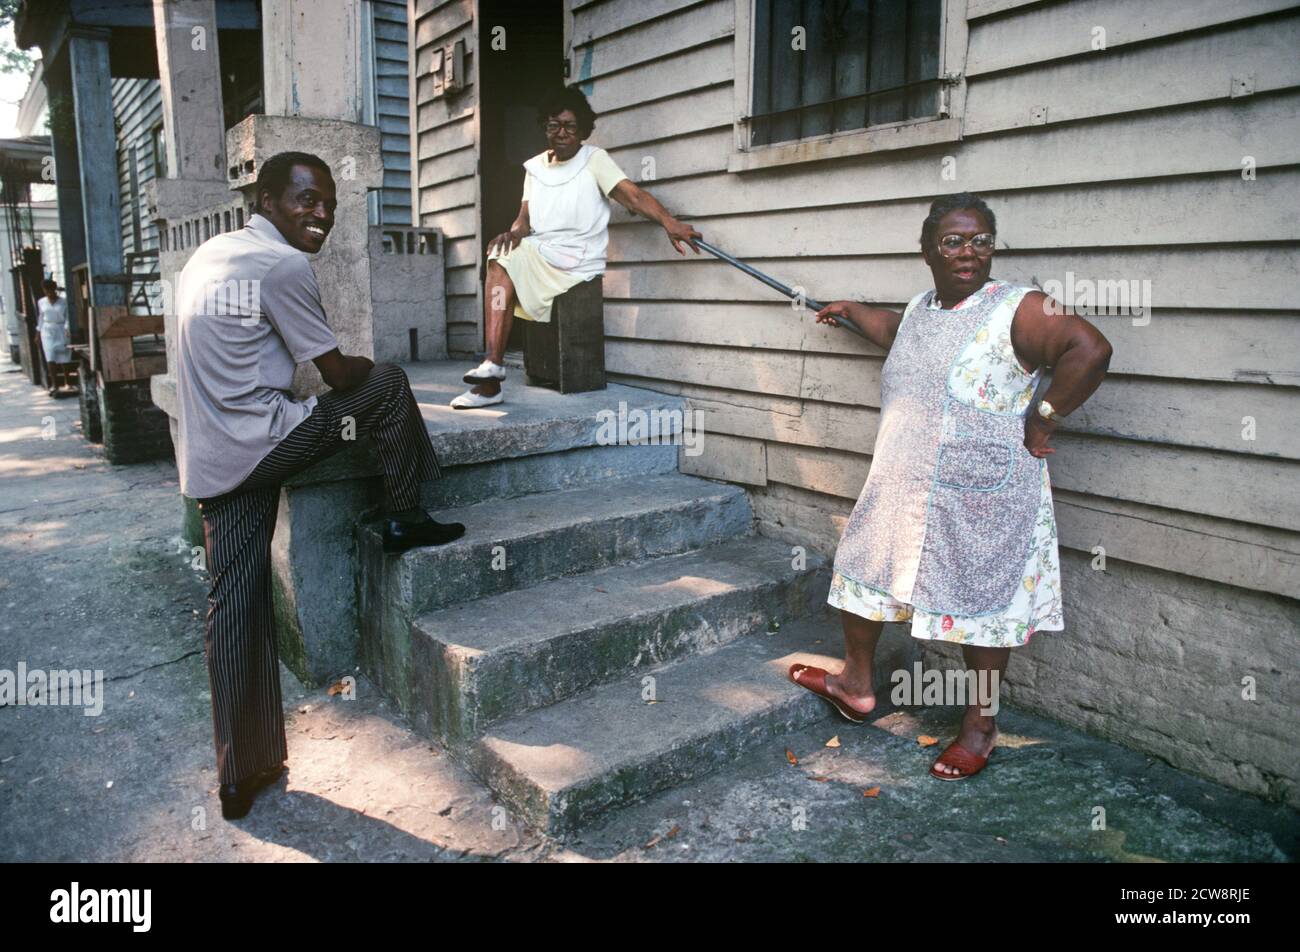 AFRICAN AMERICANS IN DOWNTOWN SAVANNAH, GEORGIA, USA, 1980s Stock Photo